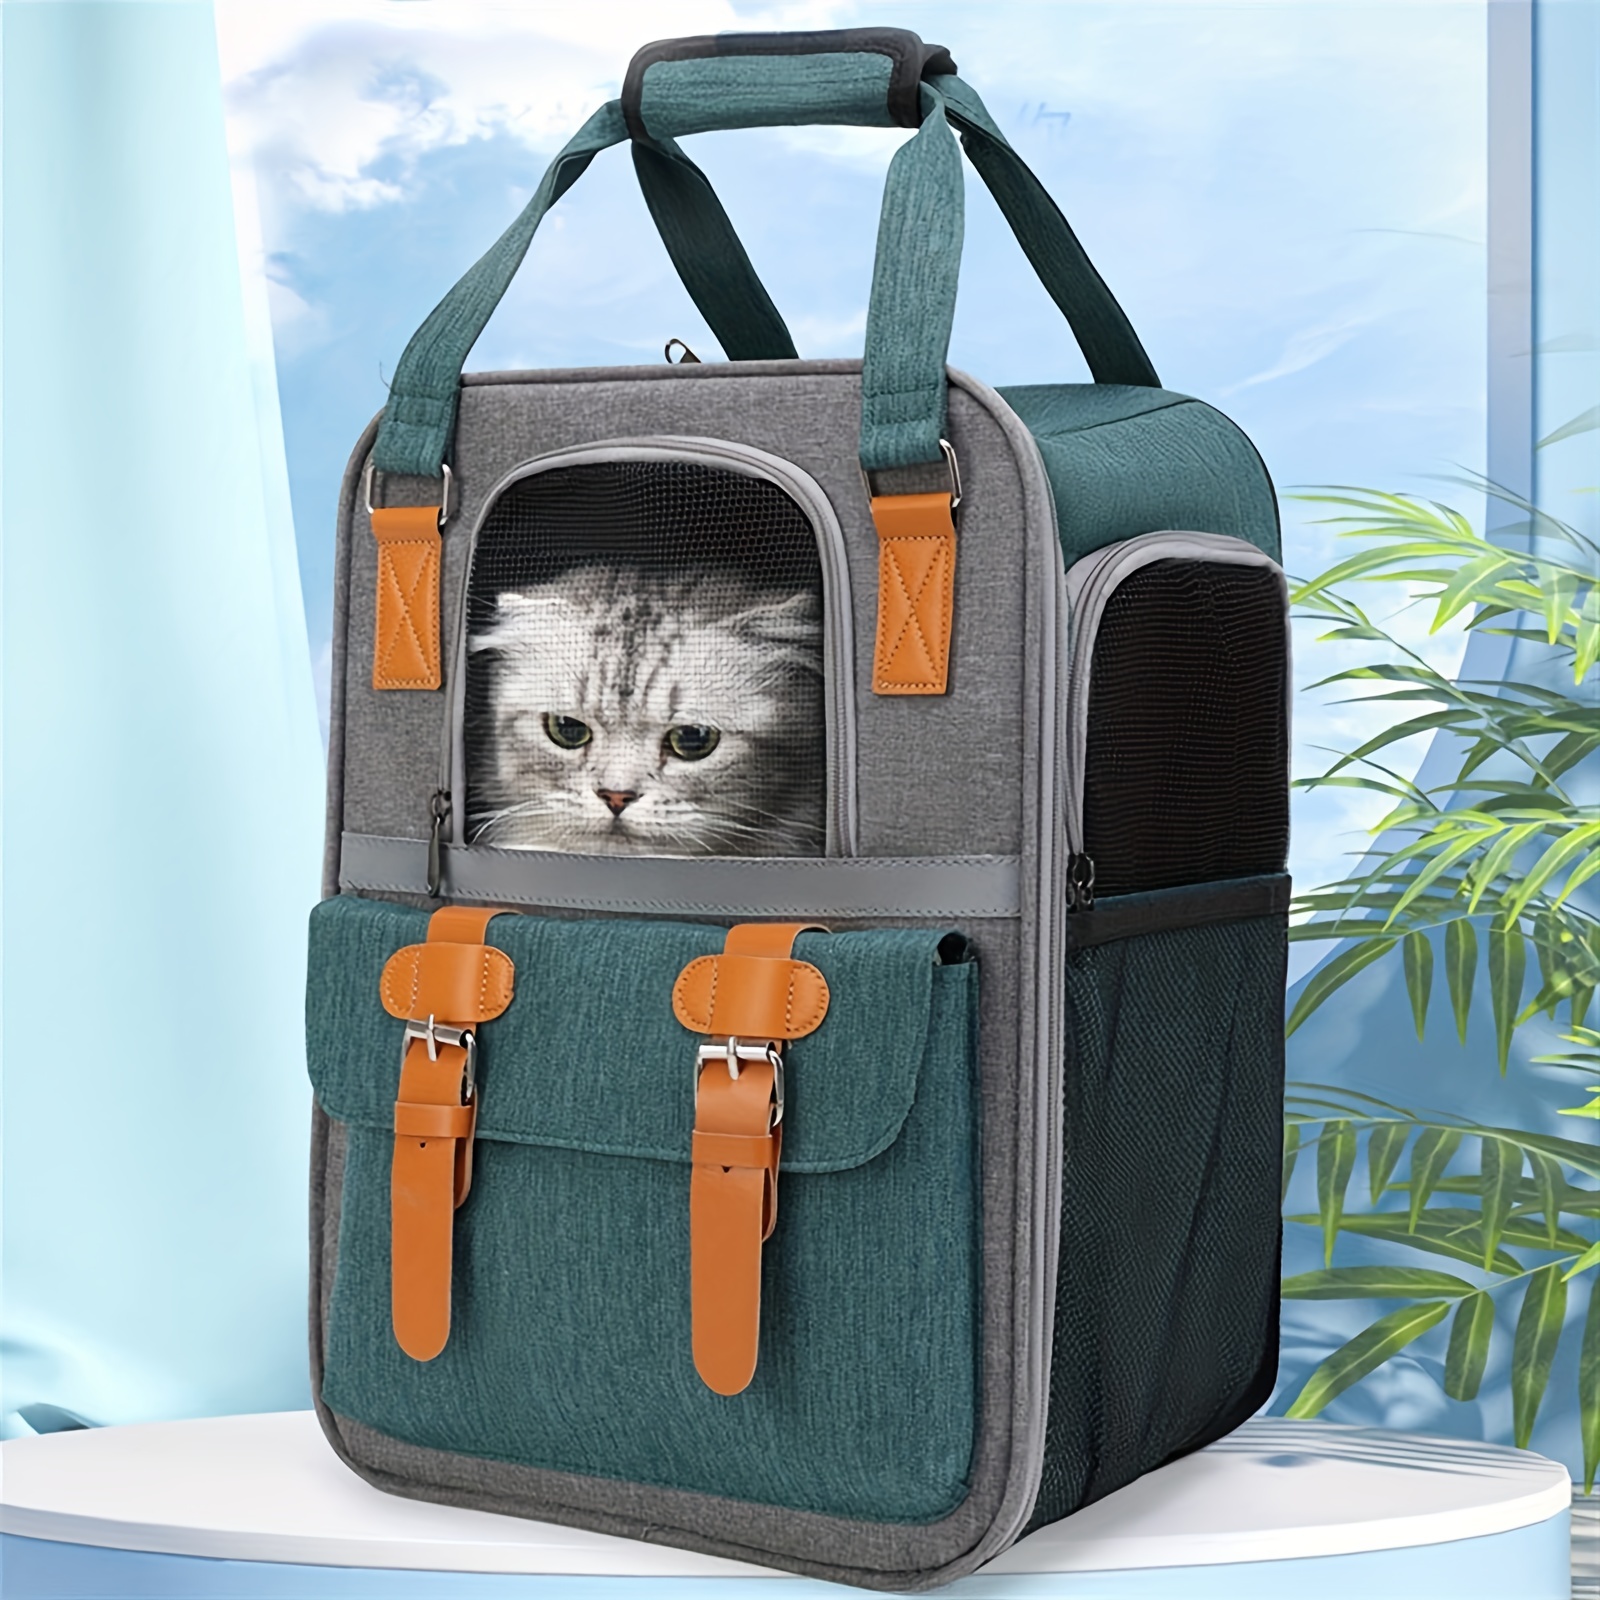 Take Your Furry Friend Anywhere With This Durable, Breathable